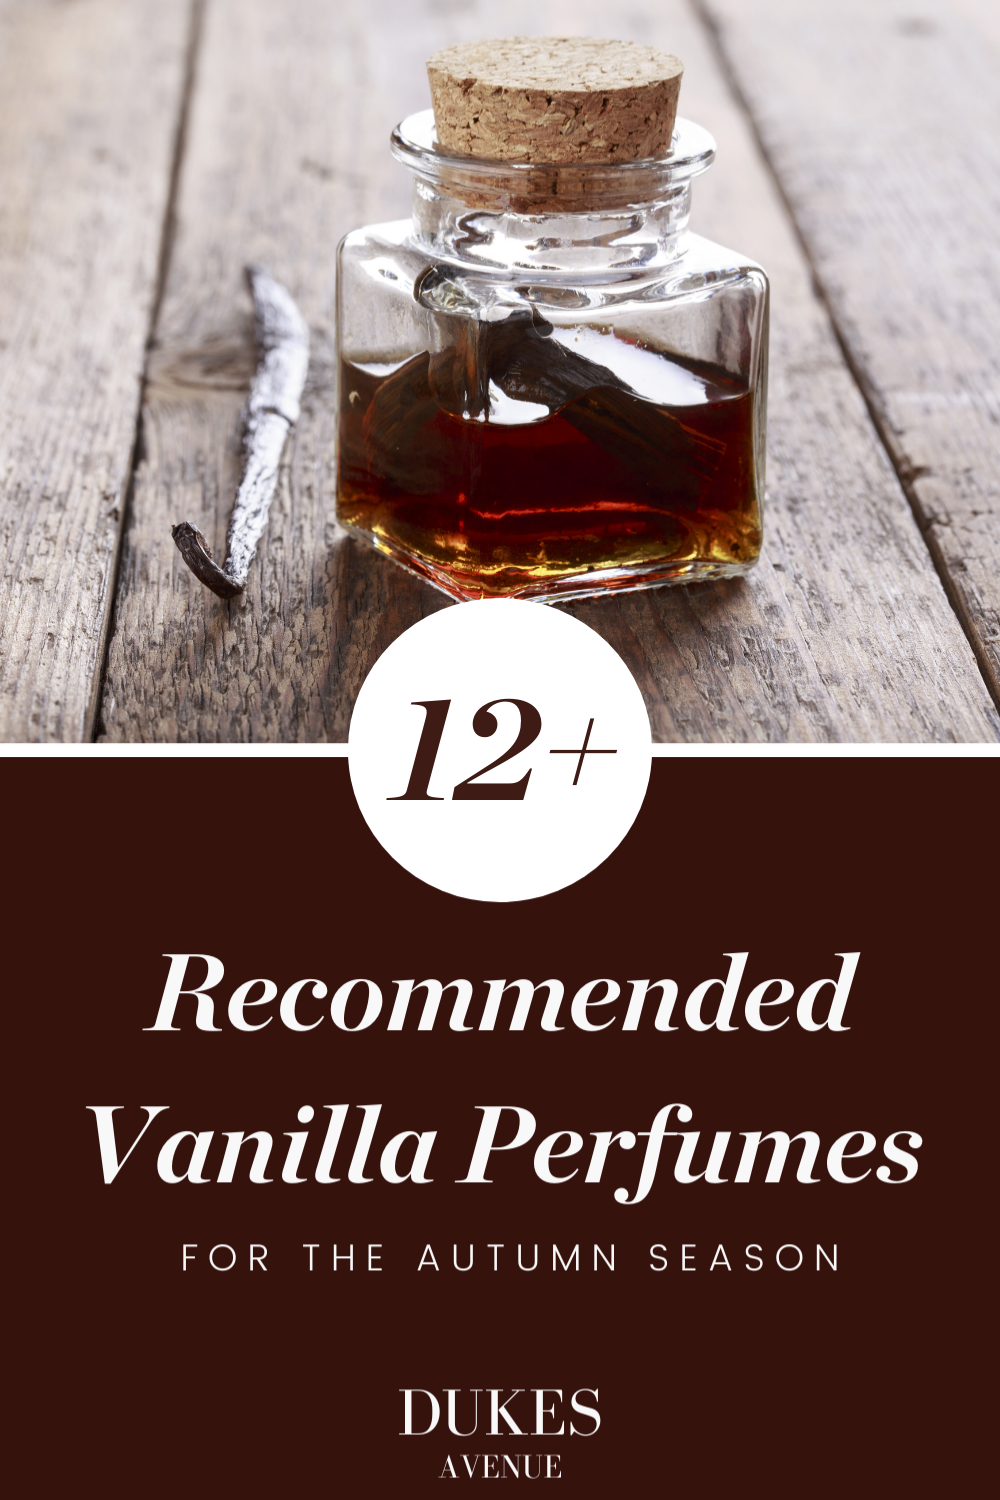 A picture of a bottle of vanilla perfume and a vanilla stick with text overlay 'recommended vanilla perfumes'